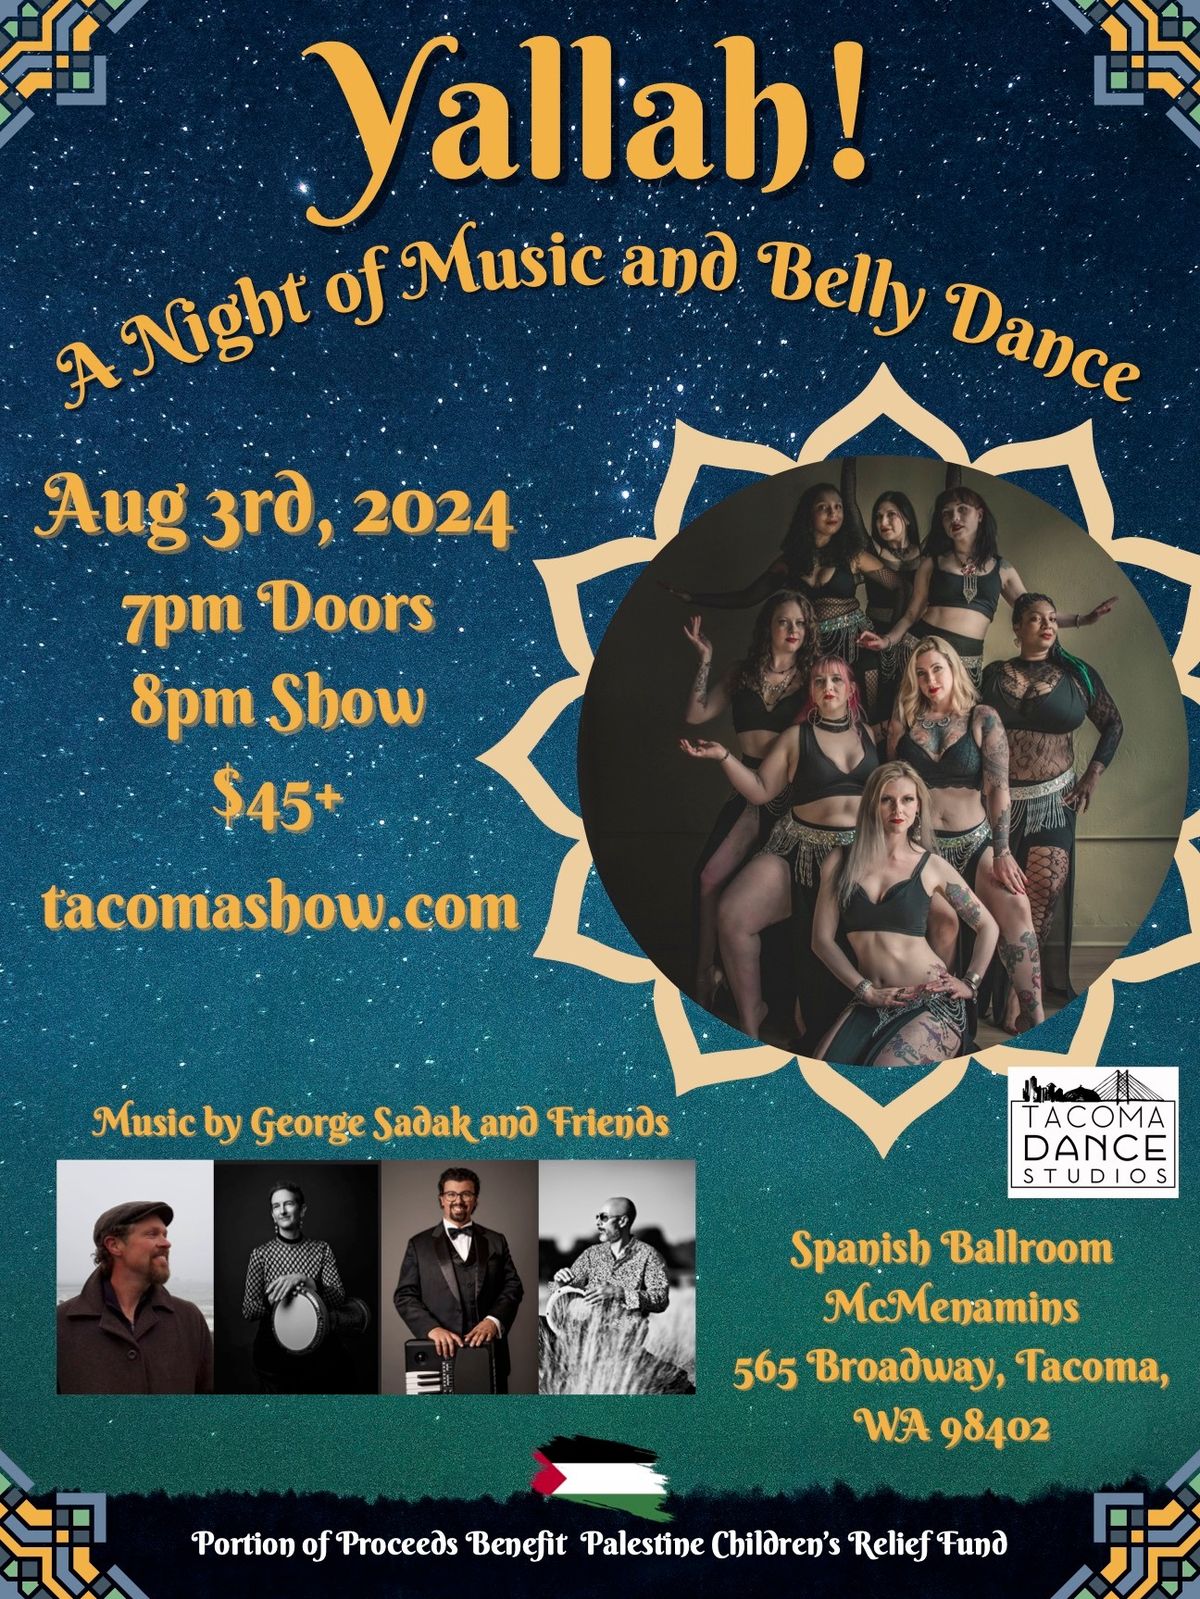 Yallah! A Night of Music and Belly Dance